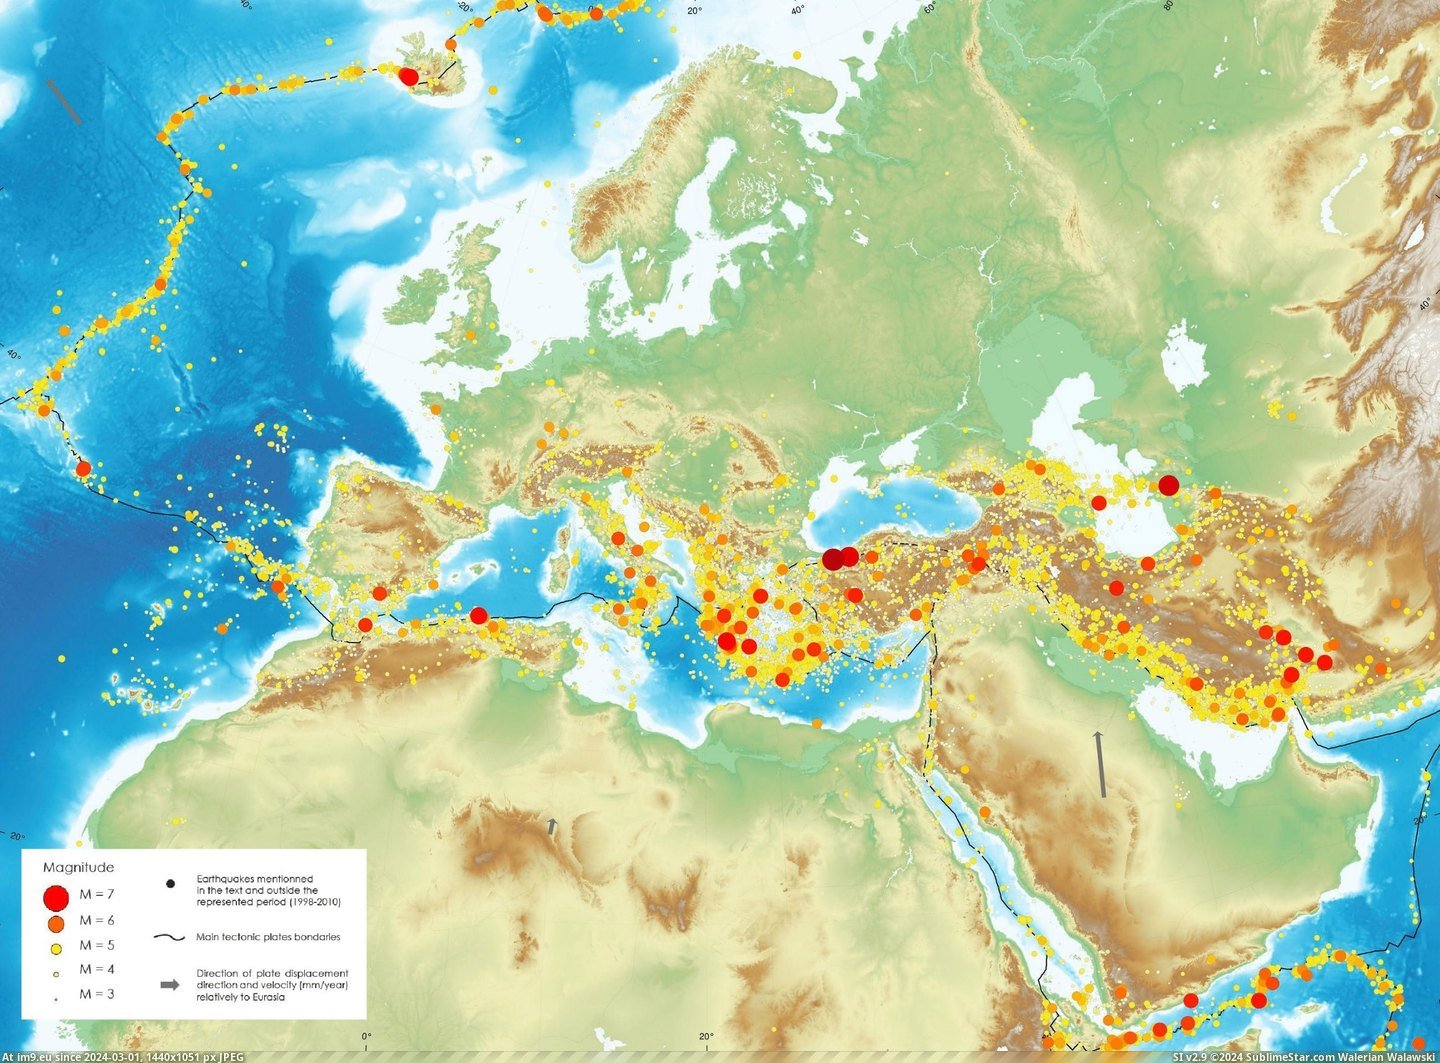 #Map #Europe #Seismic #East #Hazard [Mapporn] Seismic hazard map of Europe and Middle East [2598x1908] Pic. (Изображение из альбом My r/MAPS favs))